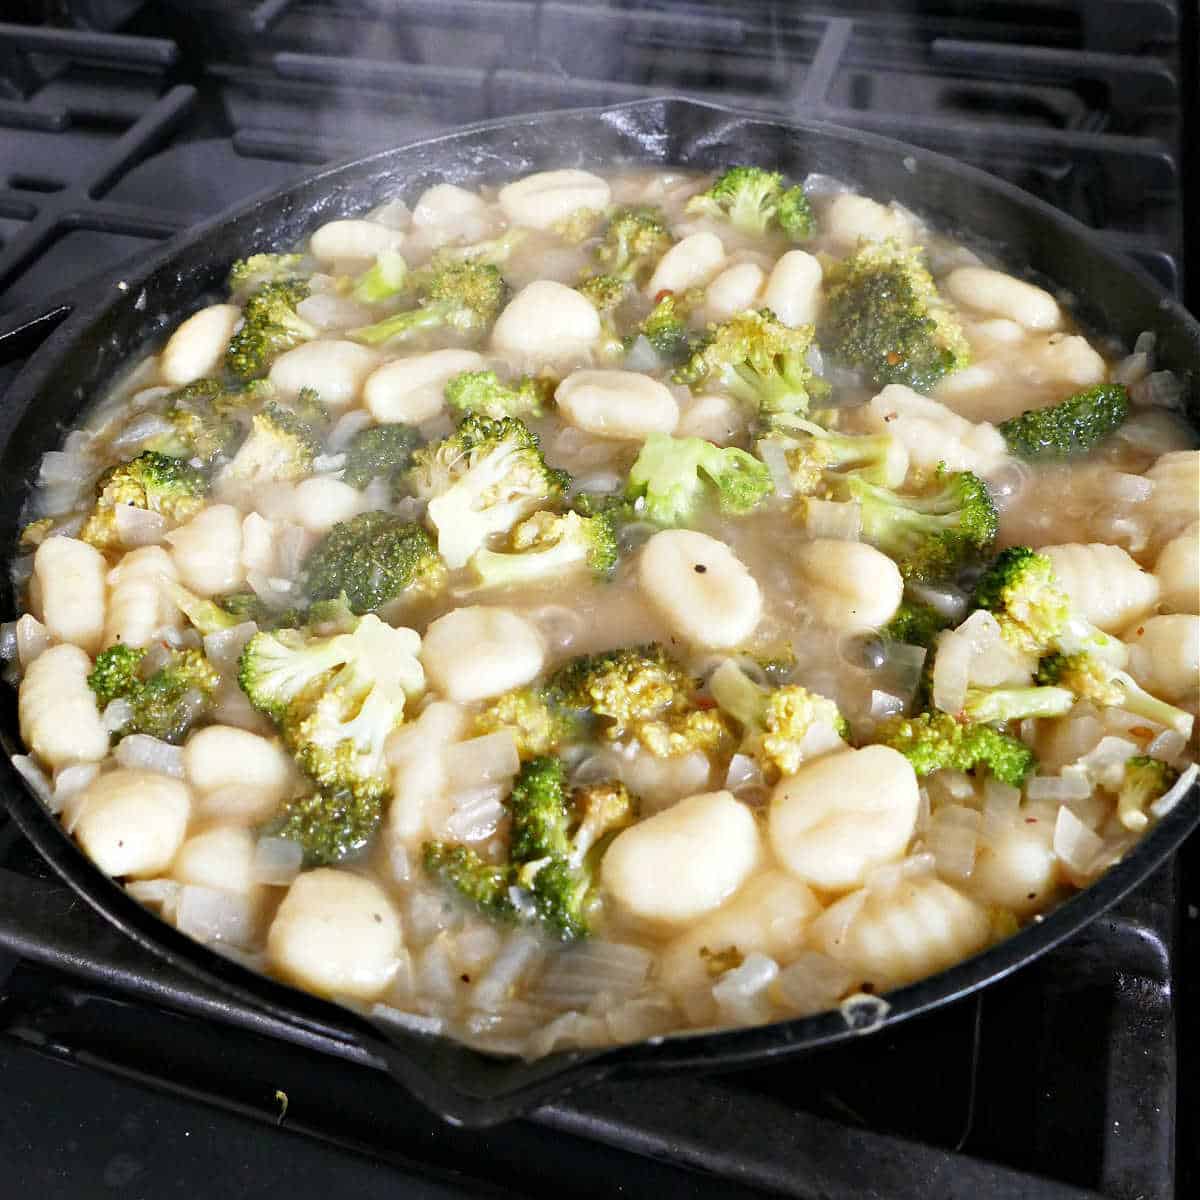 gnocchi, broccoli, vegetable broth, and seasonings cooking in a skillet on a stove